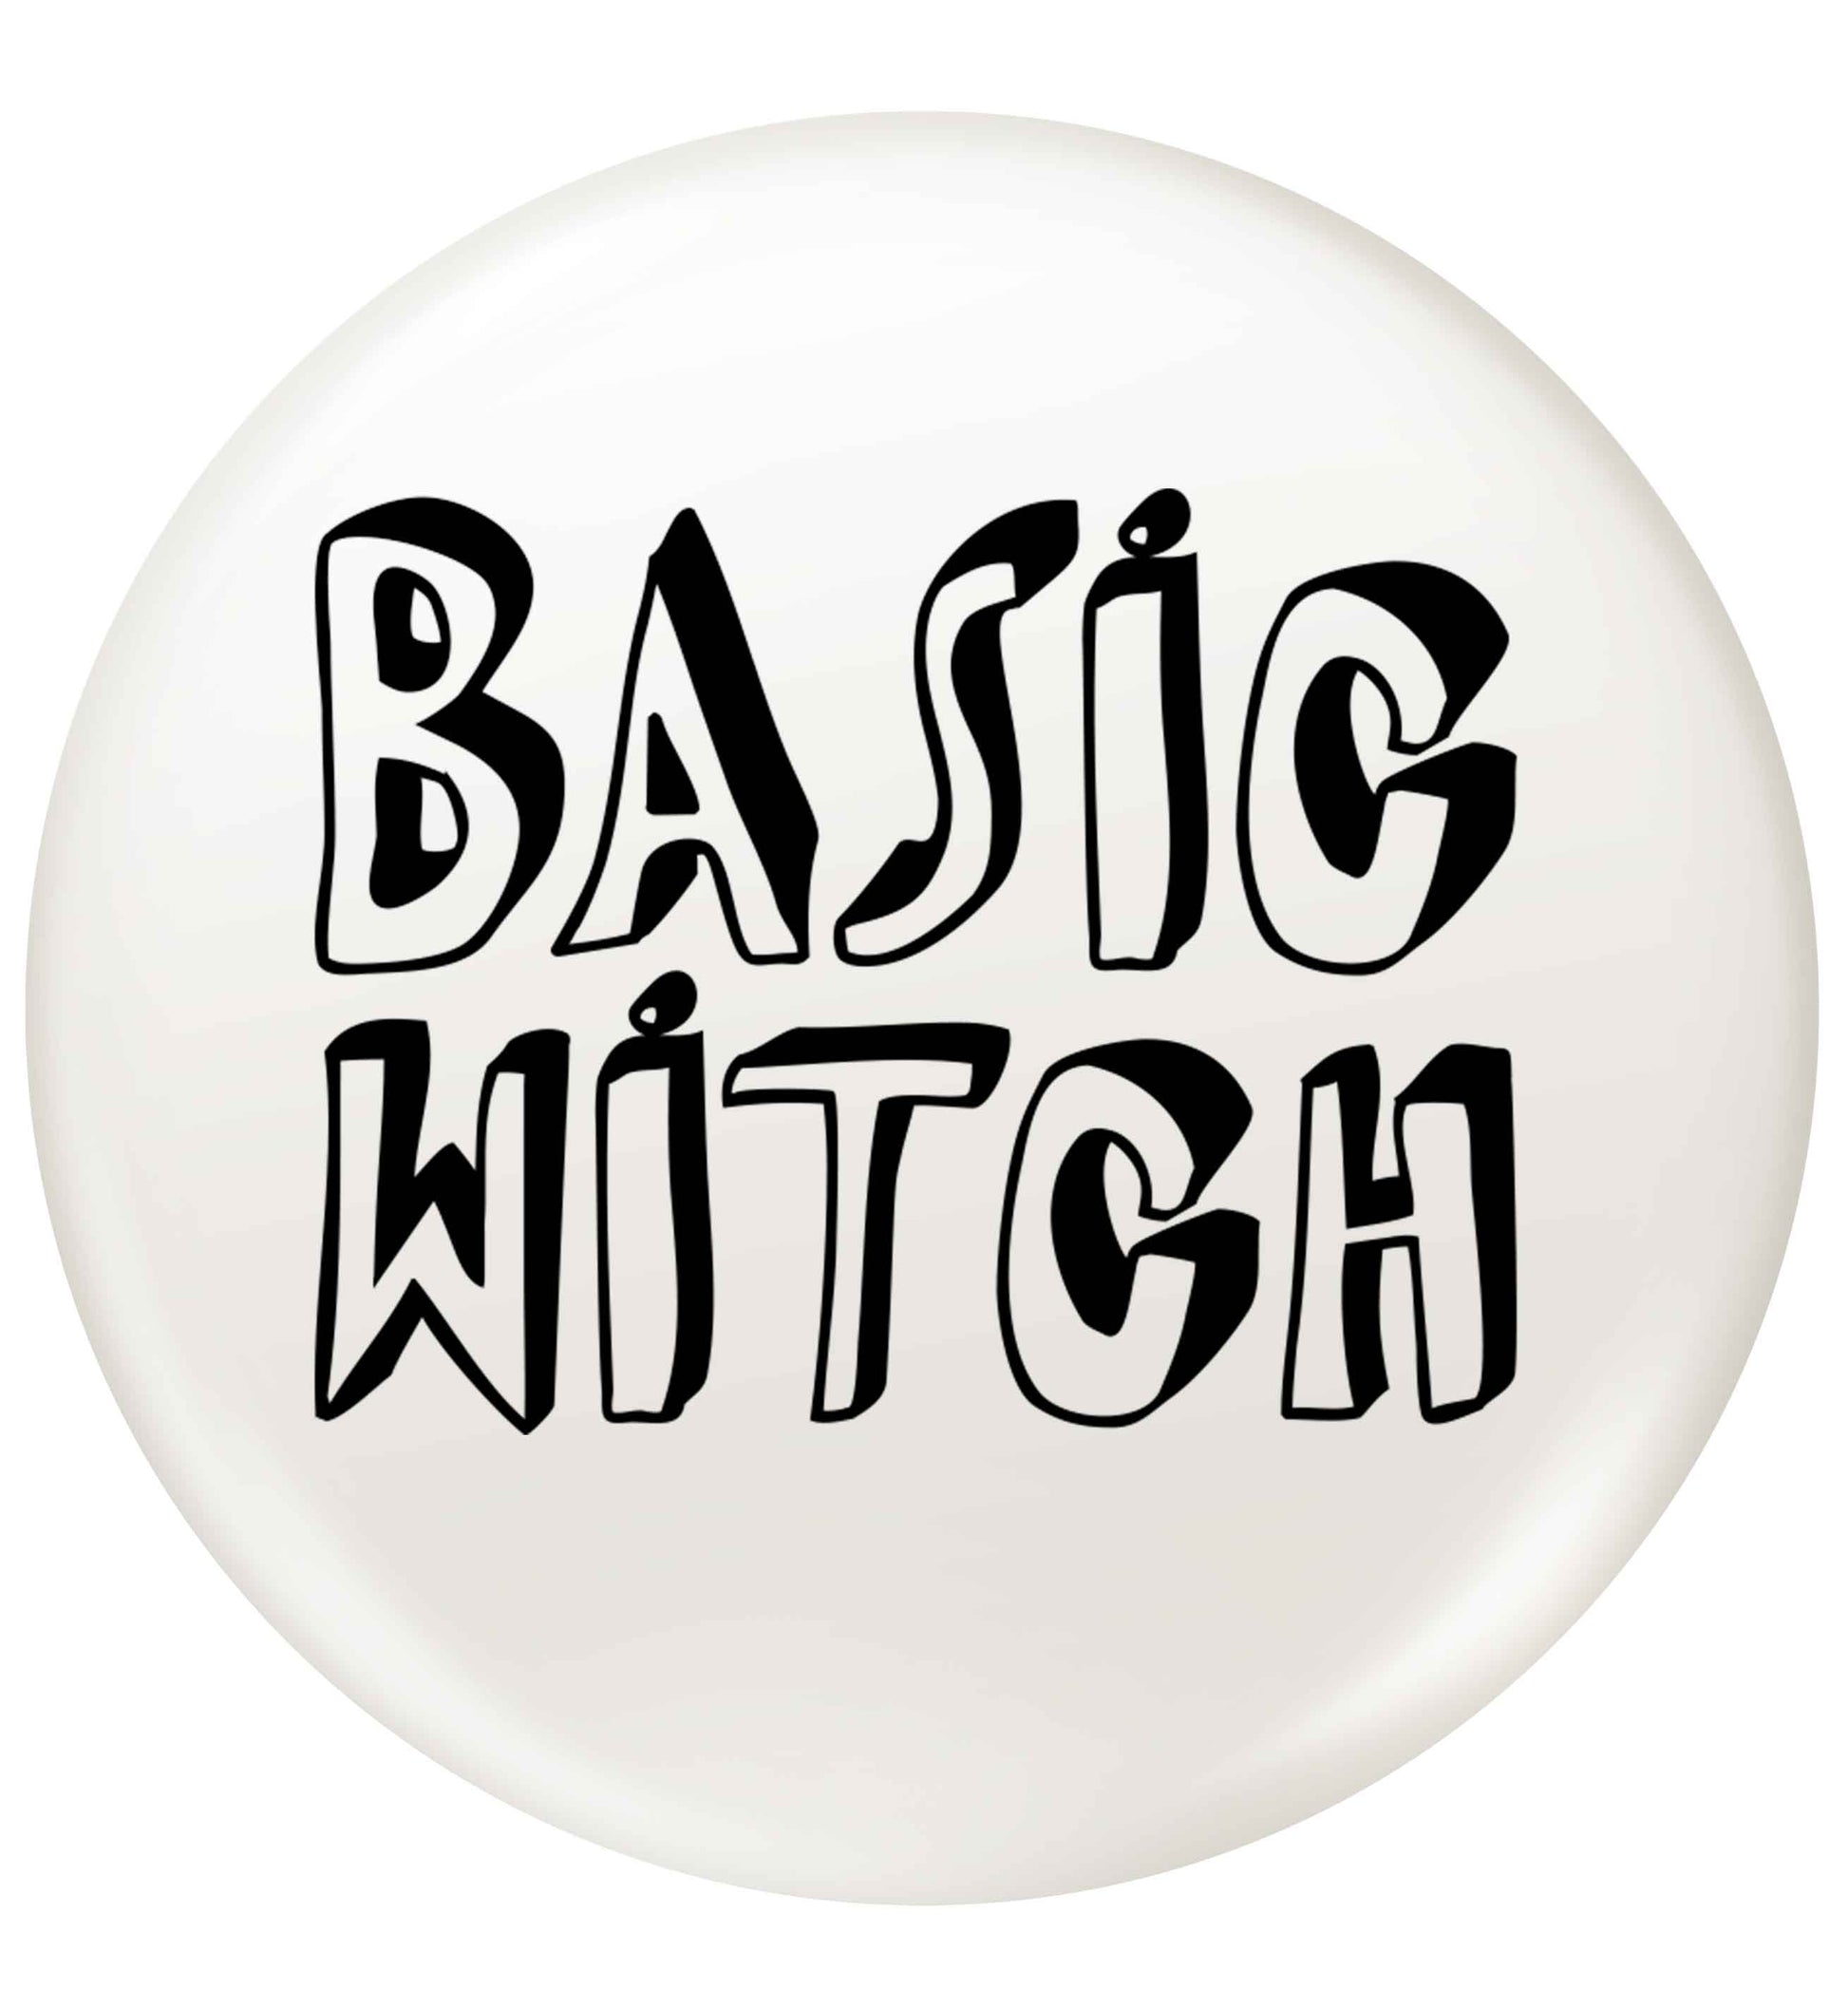 Basic witch small 25mm Pin badge